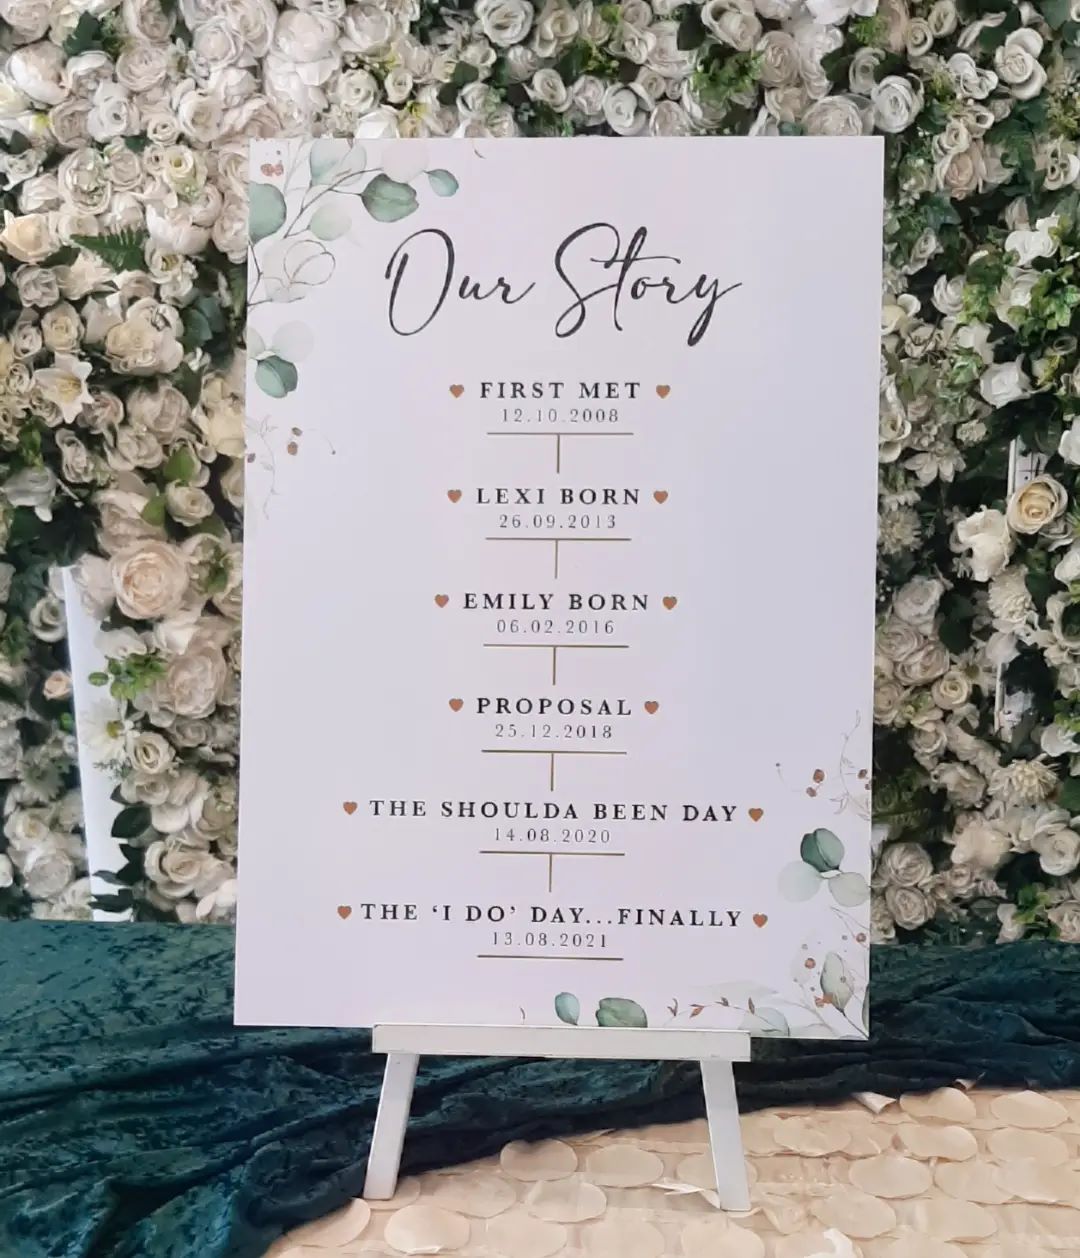 The wedding welcome sign highlights the important milestone in a couple's journey - from when their children were born to the date of the proposal.